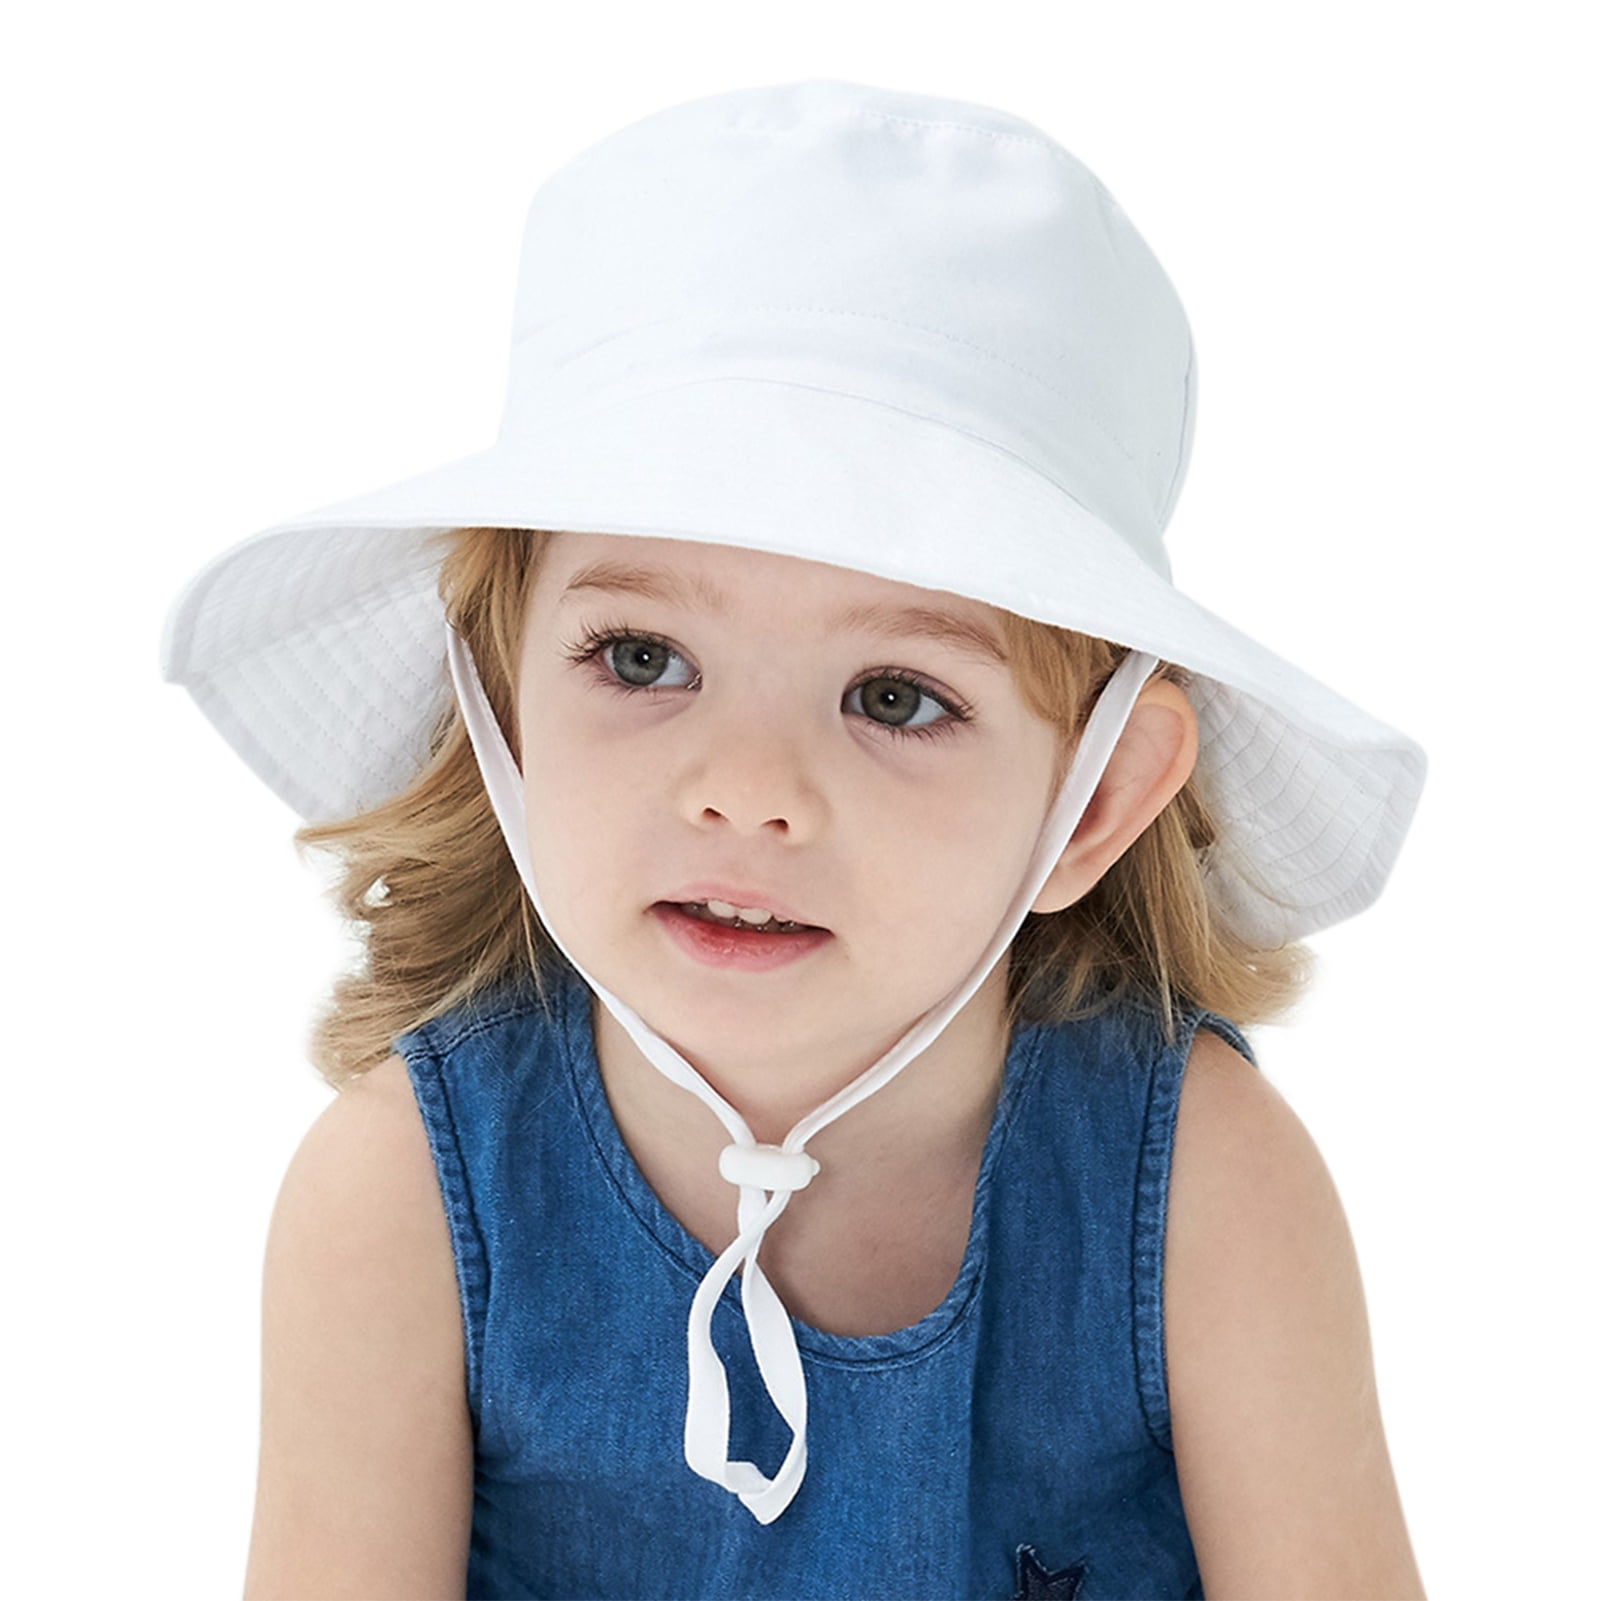 Peaoy Baby Sun Hat UPF 50+ Sun Protective Wide Brim Beach Hat for Toddler  Girls Boys Kids 